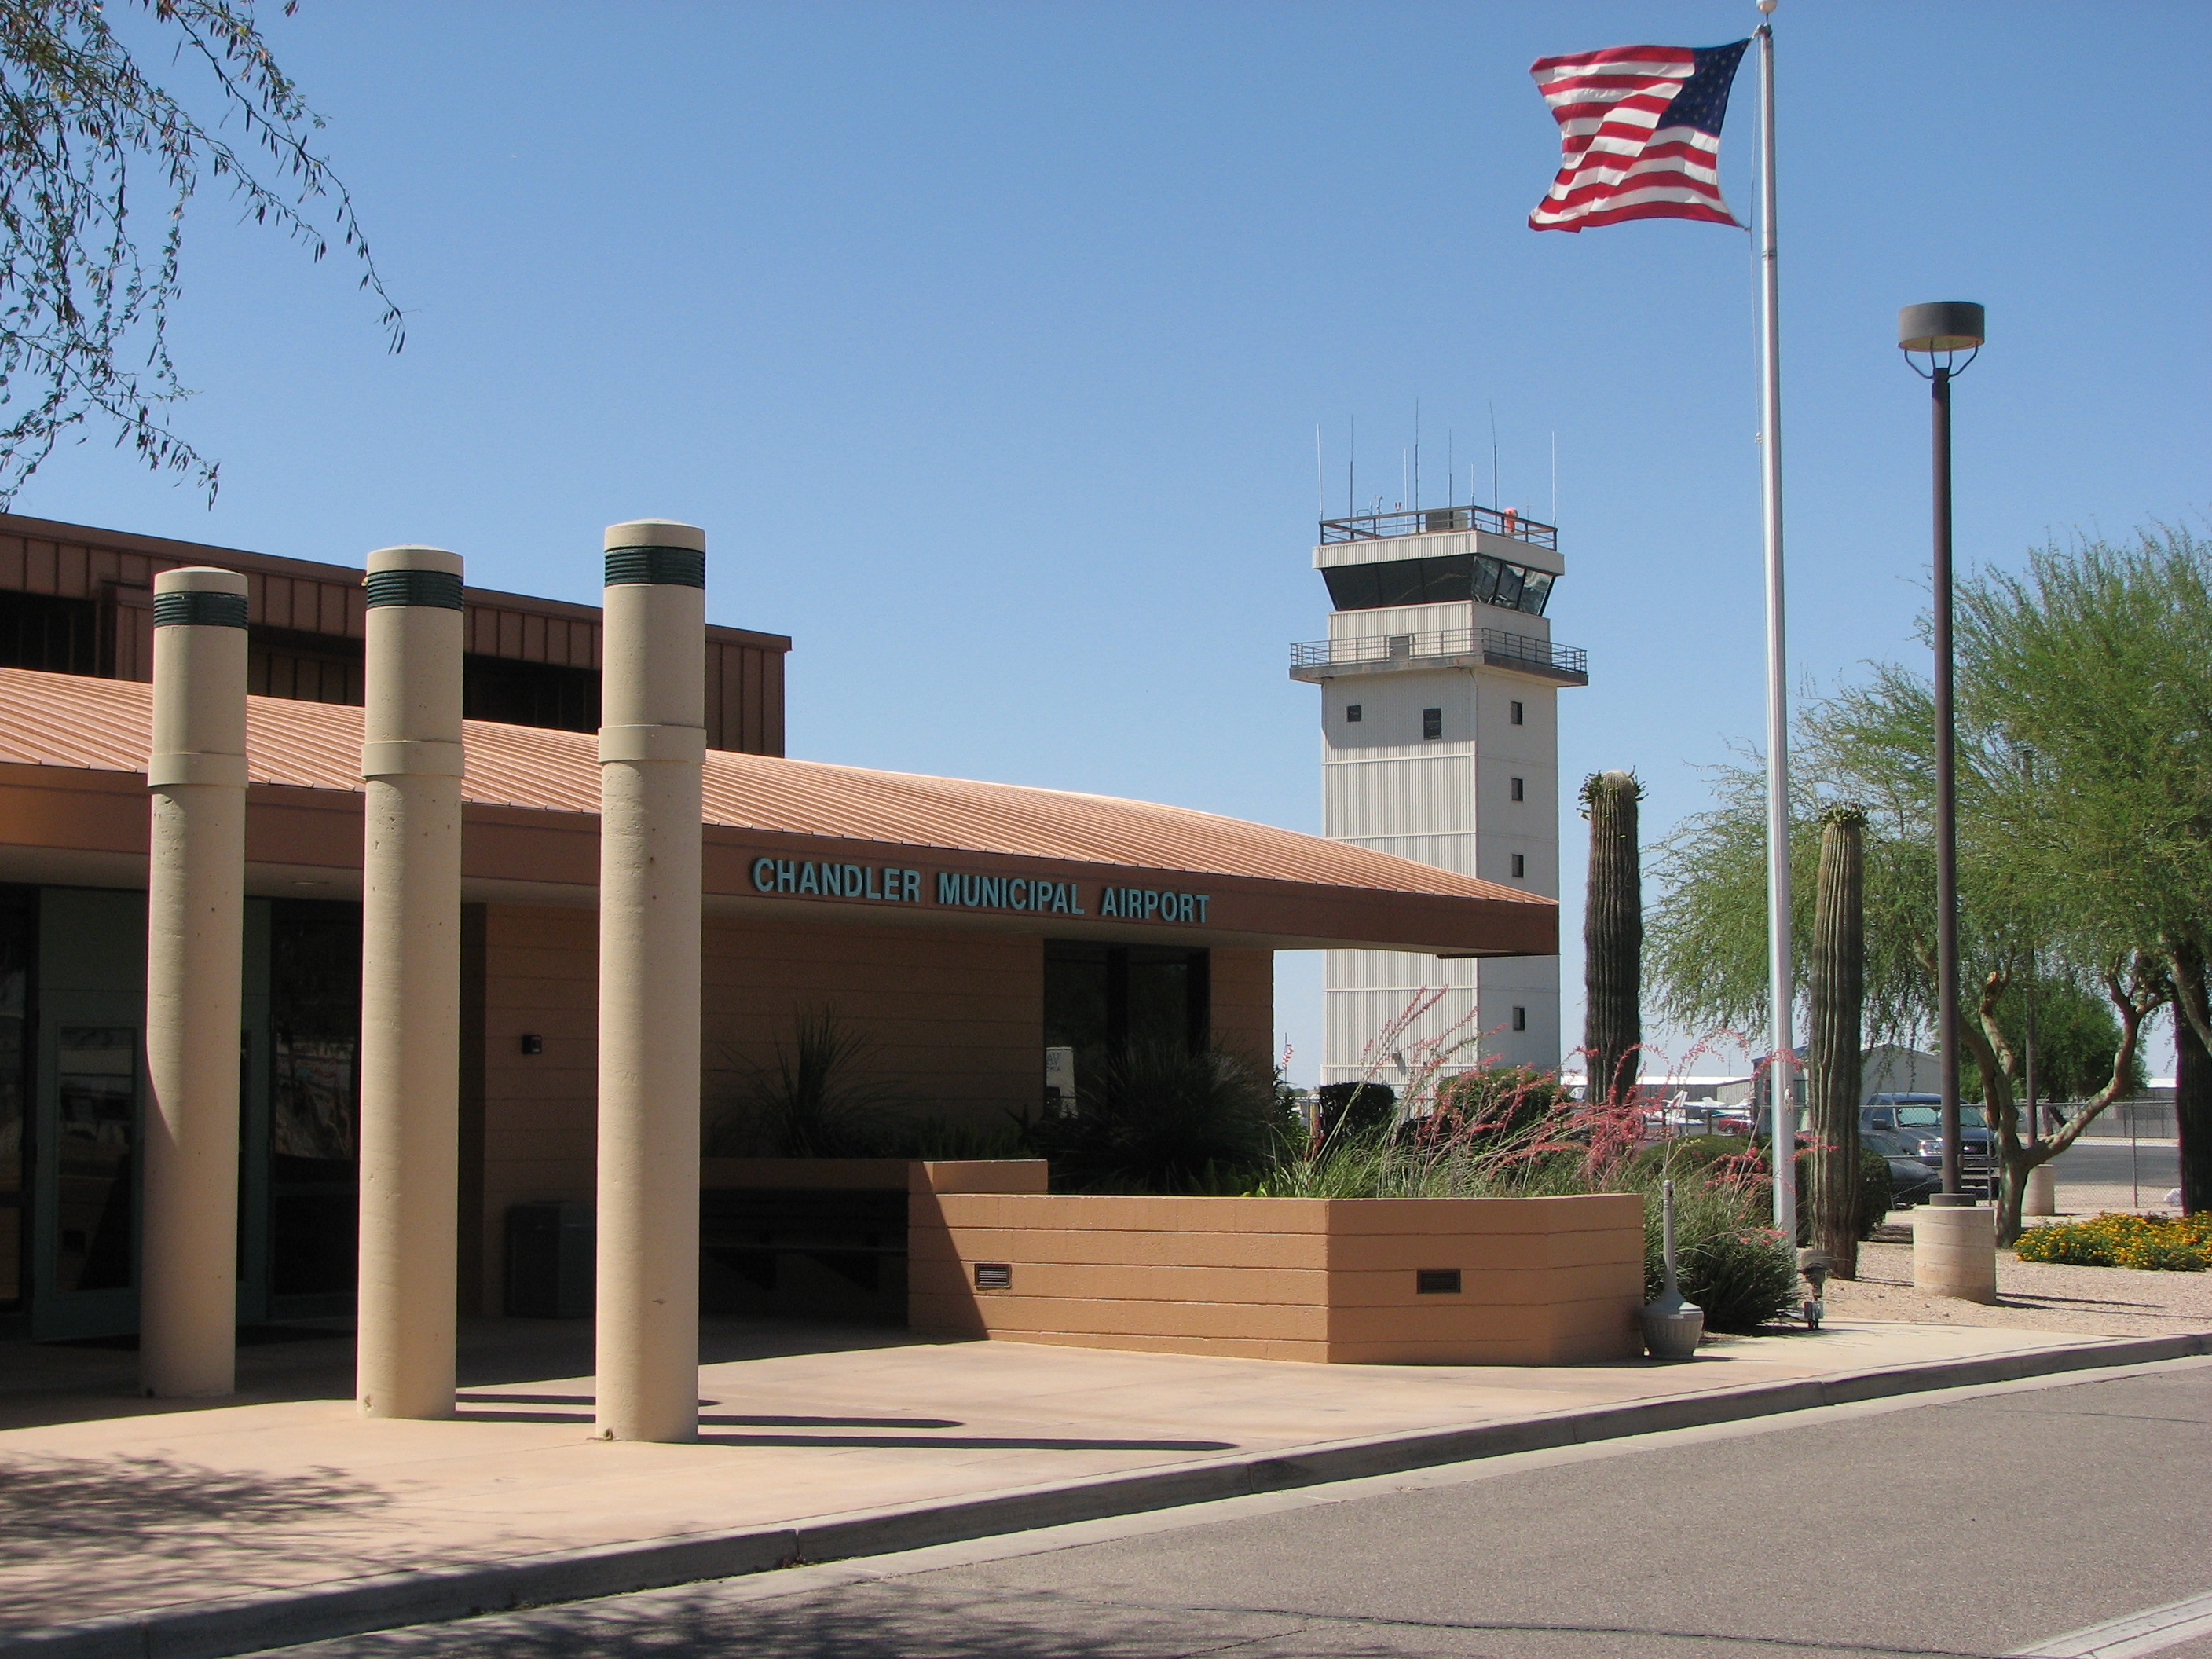 Airport takes Chandler’s Economy to New Heights